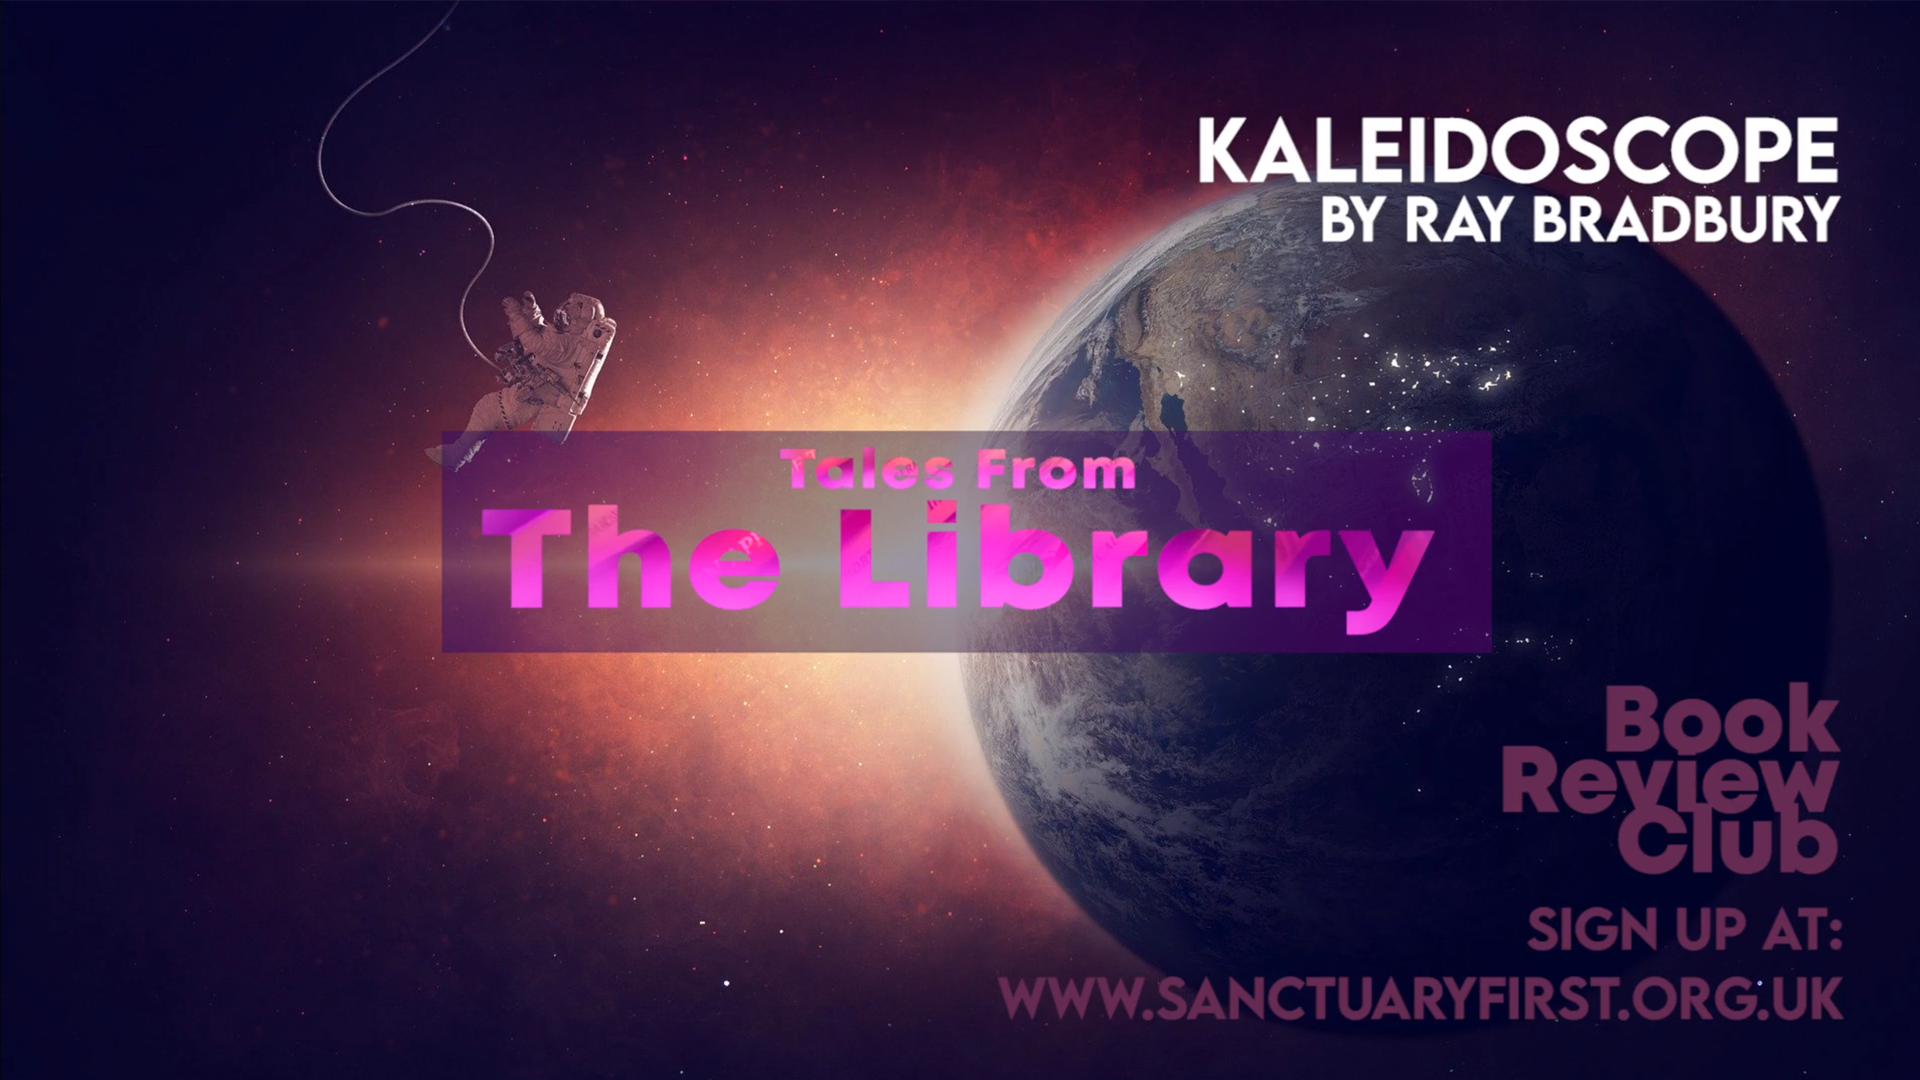 Tales From The Library - Kaleidoscope